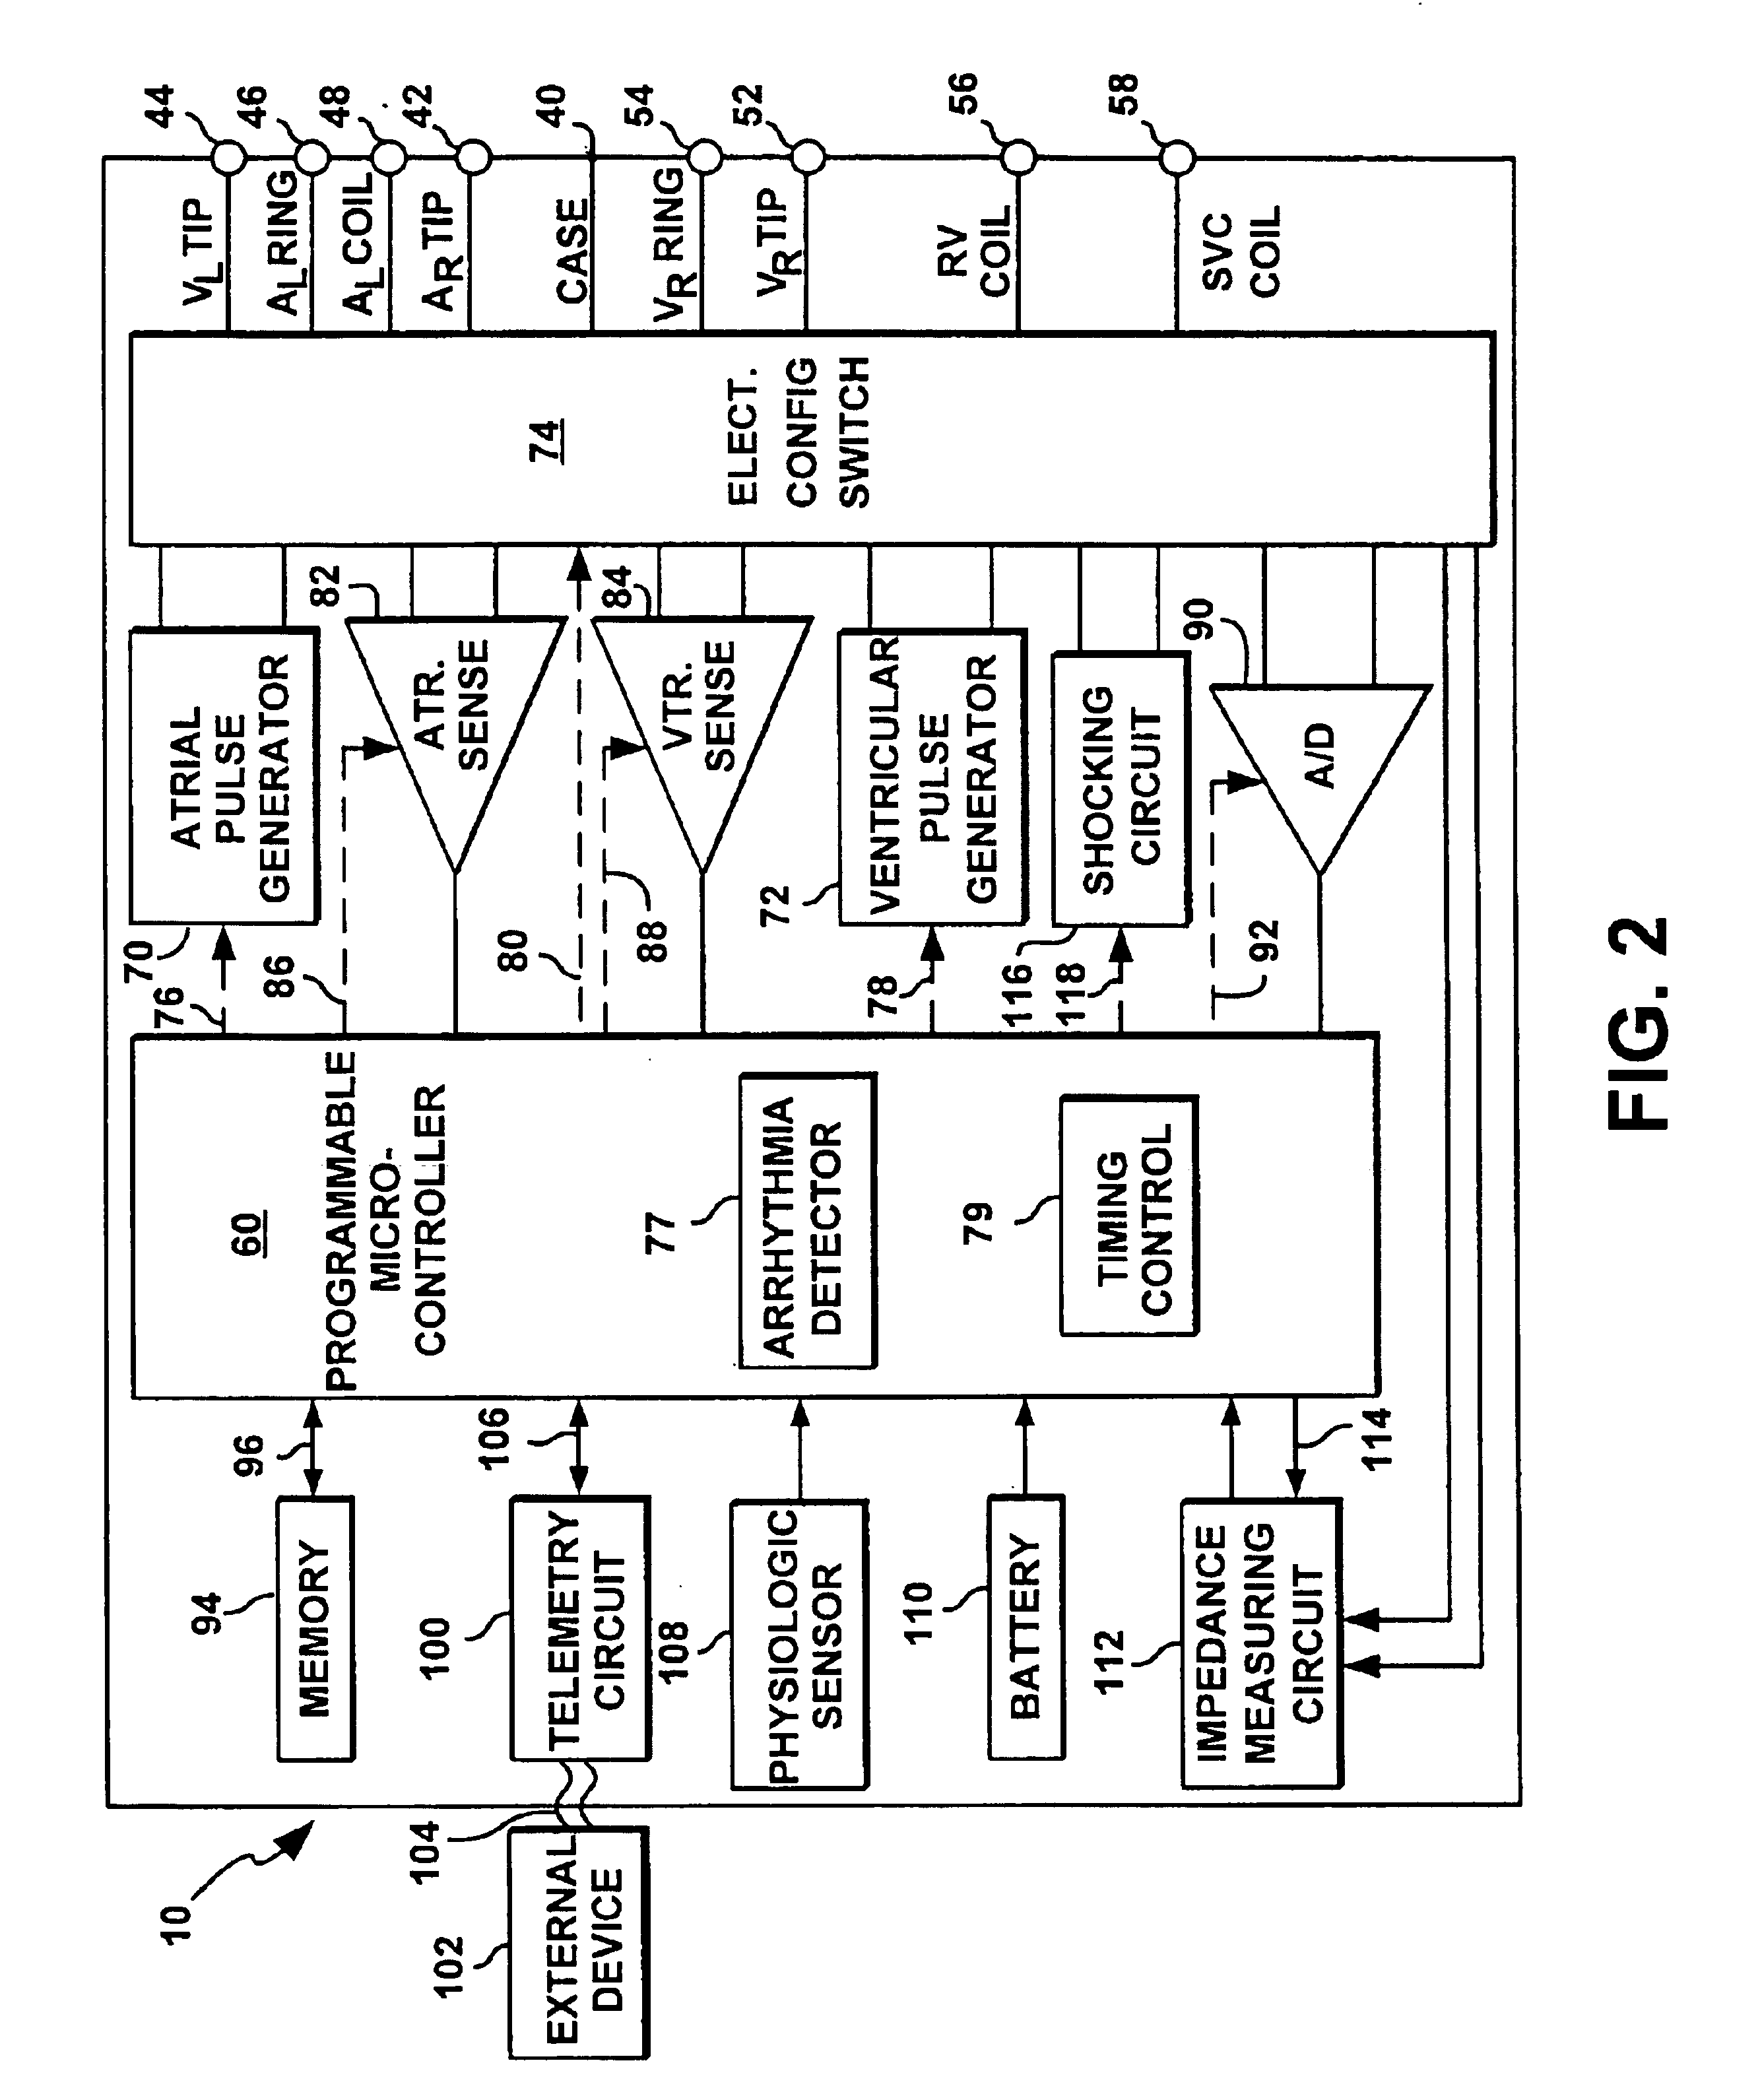 Method and apparatus for electrophysiological testing in an implantable device